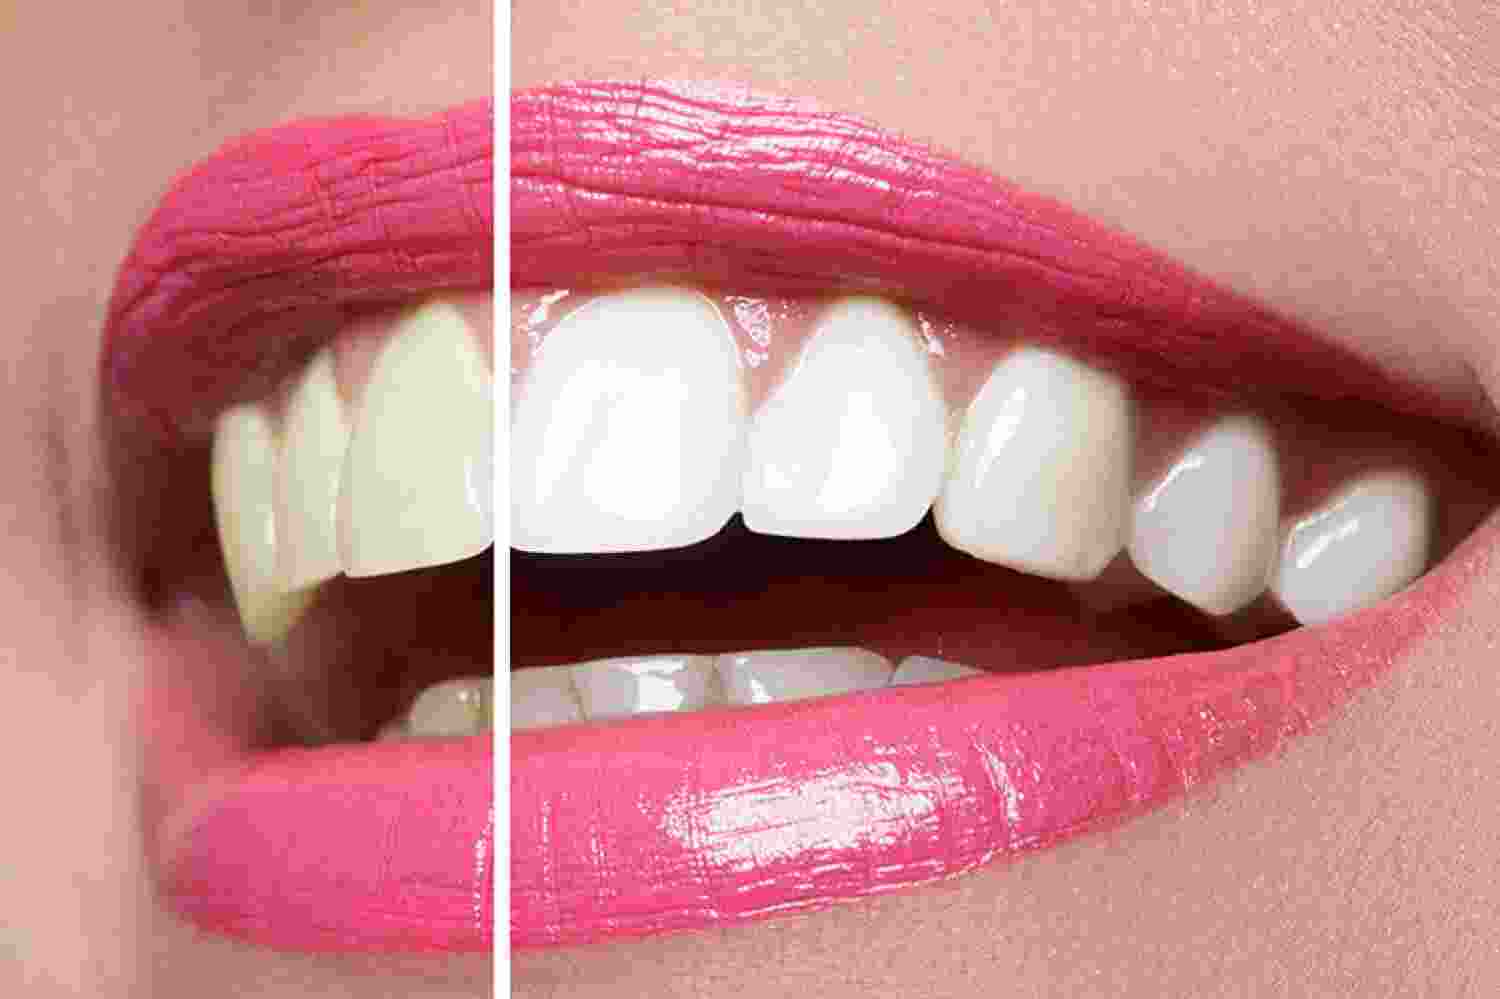 Perfect smile? Beware the risks of cheap dentistry